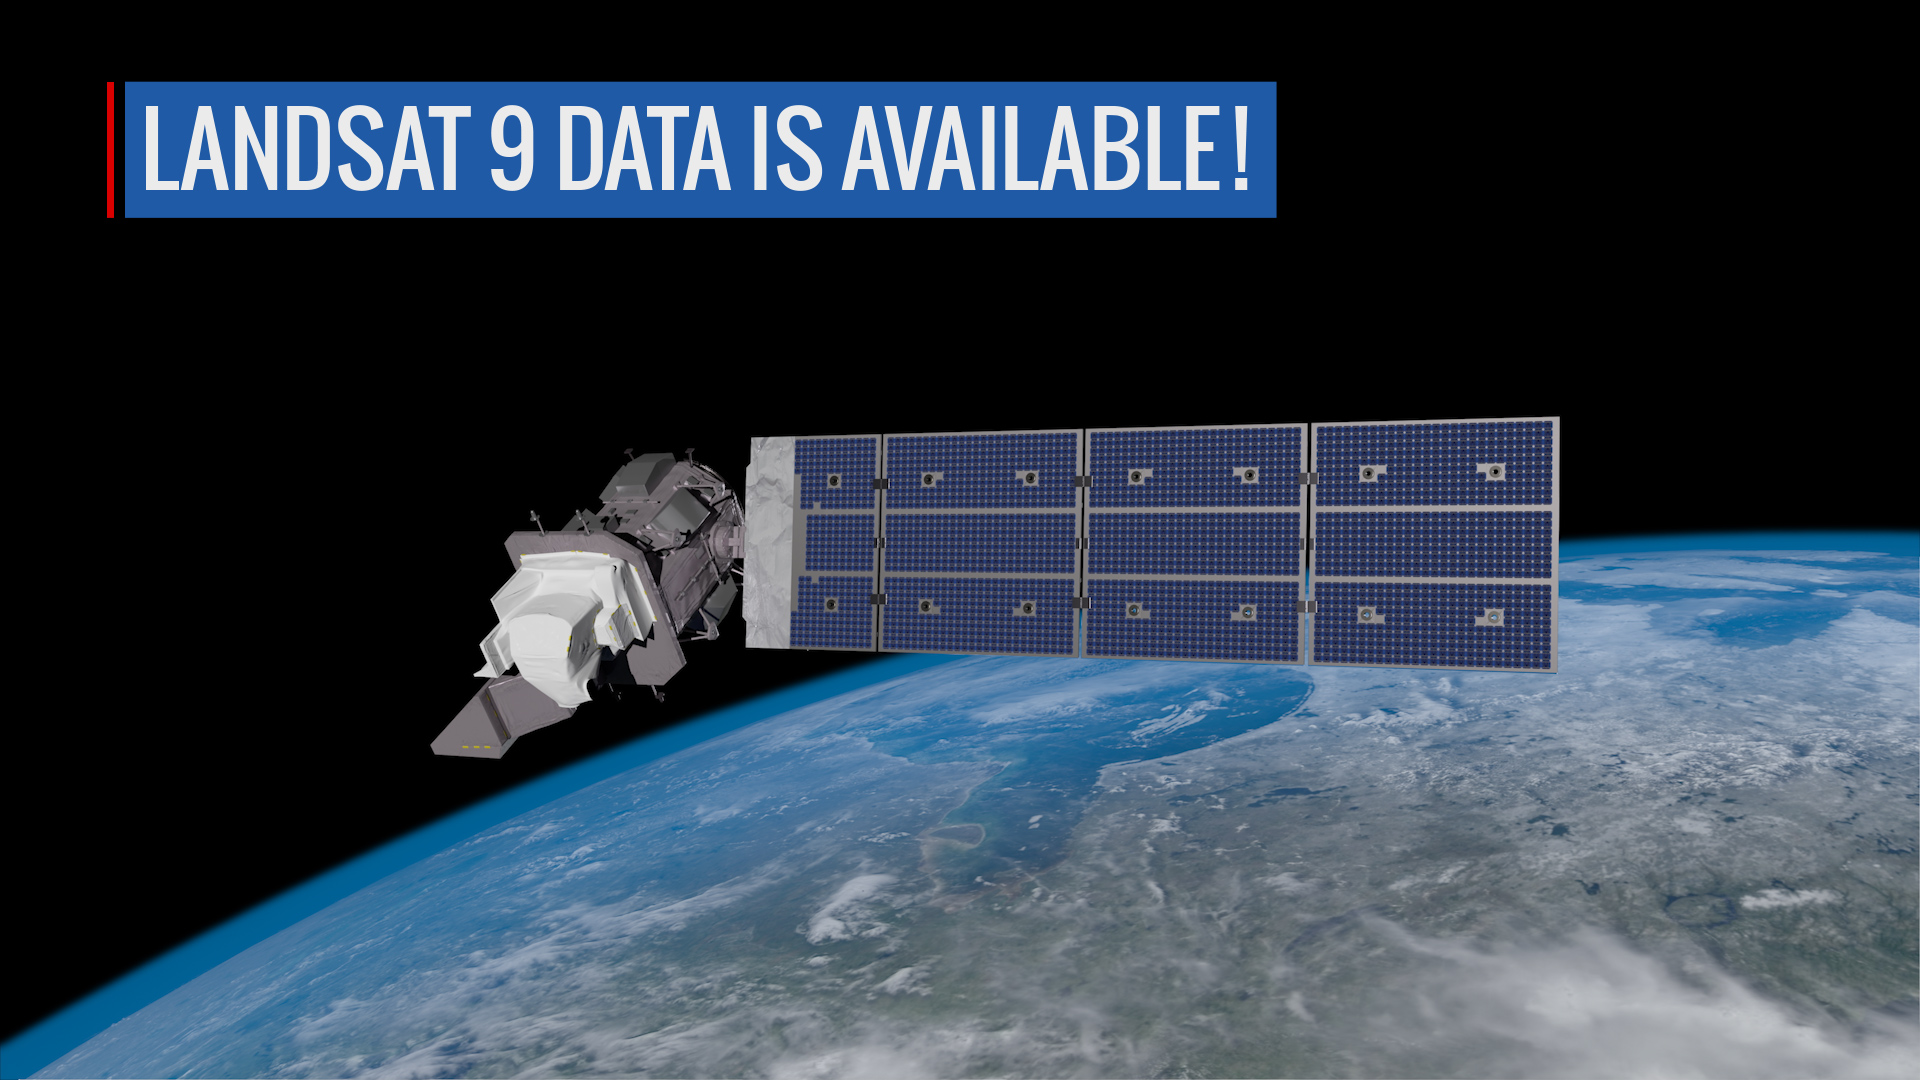 The data from Landsat 9 is available for anyone to download from the USGS data archive. Launched on Sept. 27, 2021, the new satellite and its instruments went through testing and calibration by the mission team. Now, with both Landsat 9 and Landsat 8 in orbit, there will be high-quality, medium-resolution images of Earth’s landscapes and coastal regions every eight days.Music: Amazing Discoveries by Damien Deshayes [SACEM], published by KTSA Publishing [SACEM]  available from Universal Production Music; The Troubleshooter by Anders Johan Greger Lewen [STIM], published by Primetime Productions, Ltd [PRS]; Bright Patterns by Gregg Lehrman [ASCAP] and John Christopher Nye [ASCAP], published by Soundcast Music [SESAC]Complete transcript available.Watch this video on the NASA Goddard YouTube channel.